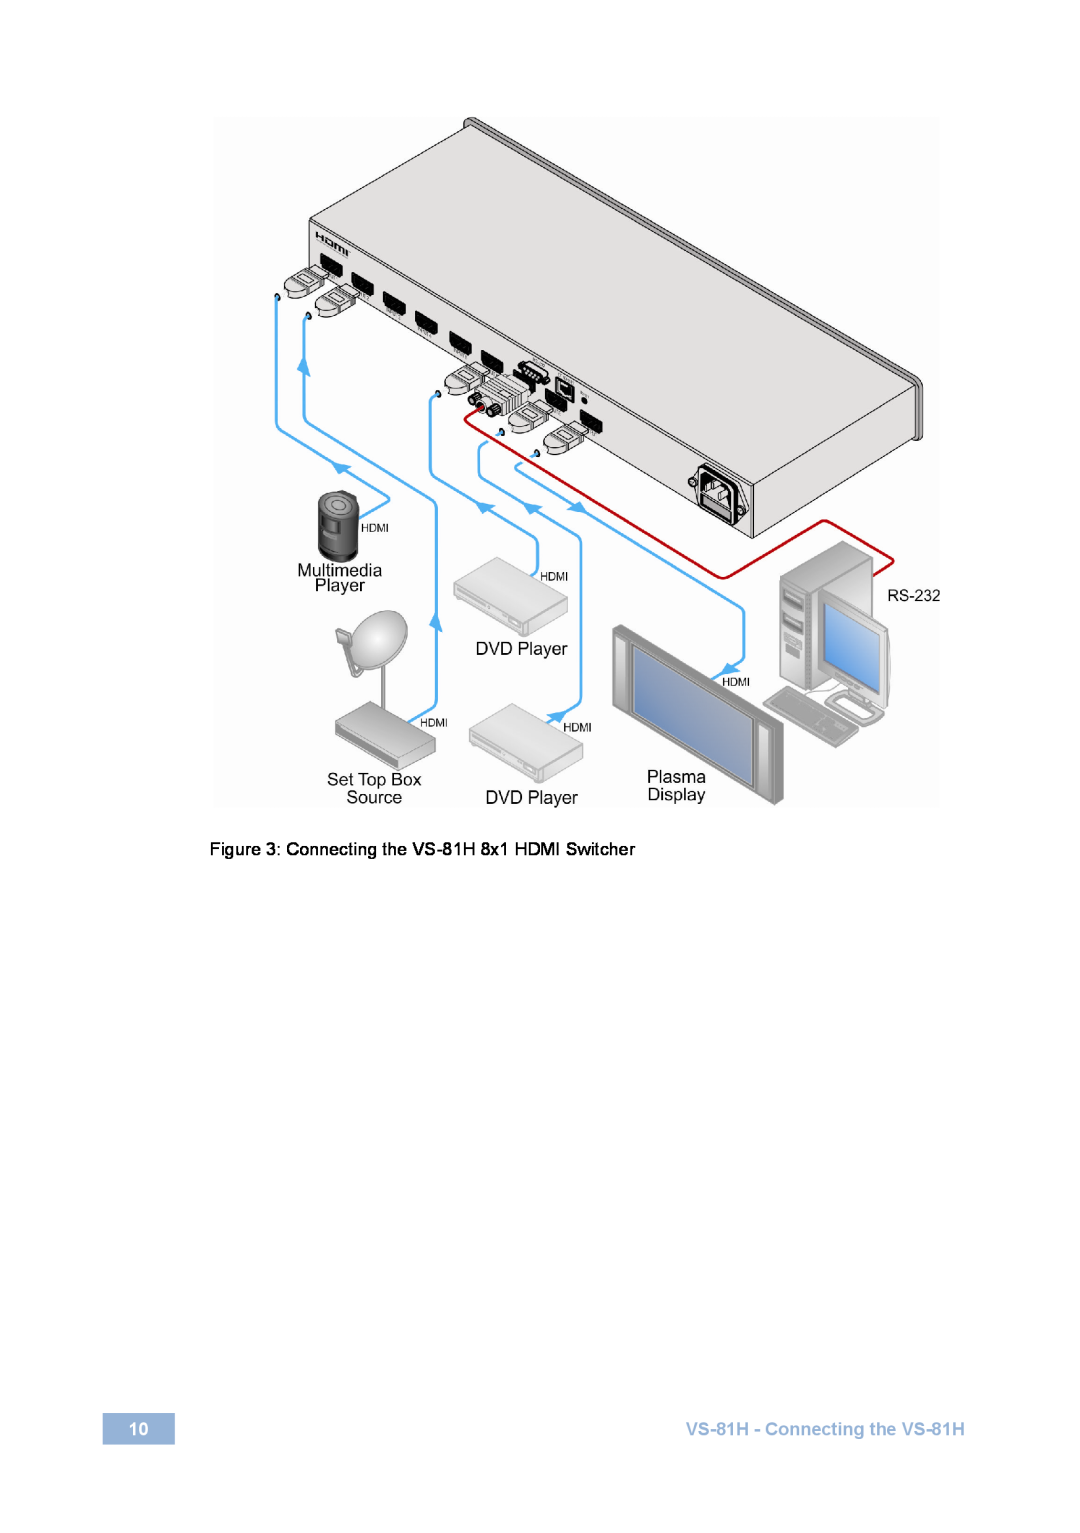 Kramer Electronics user manual Connecting the VS-81H8x1 HDMI Switcher, VS-81H- Connecting the VS-81H 